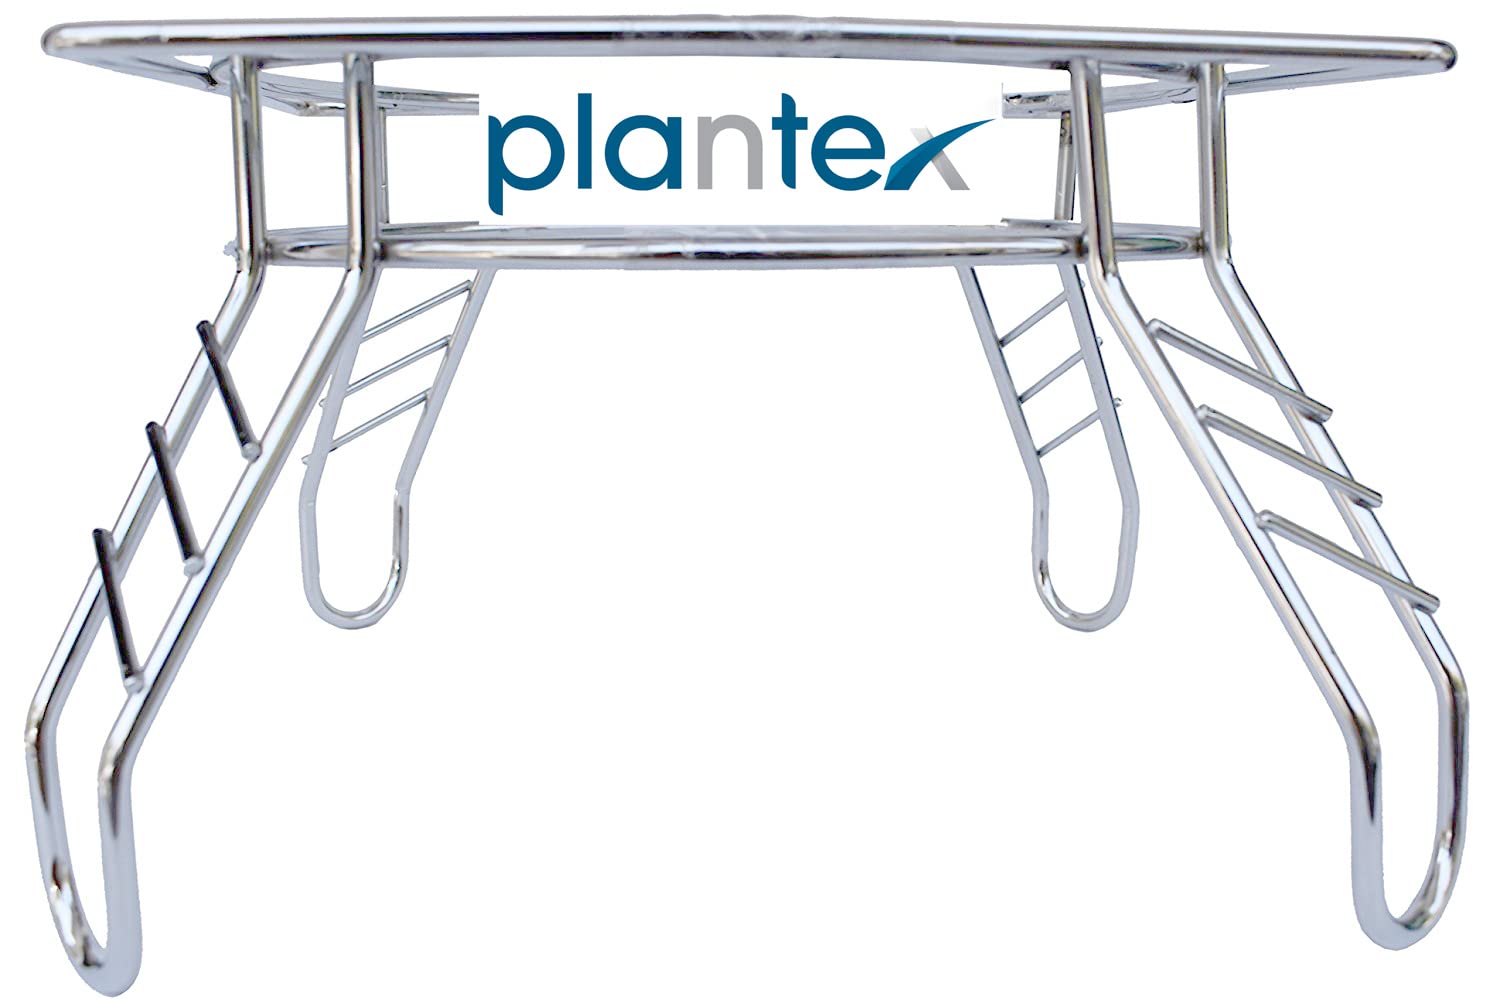 Plantex Heavy Stainless Steel Matka Stand/Pot Stand (21.5 x 21.5 x 14.5 cm, Silver-Chrome)